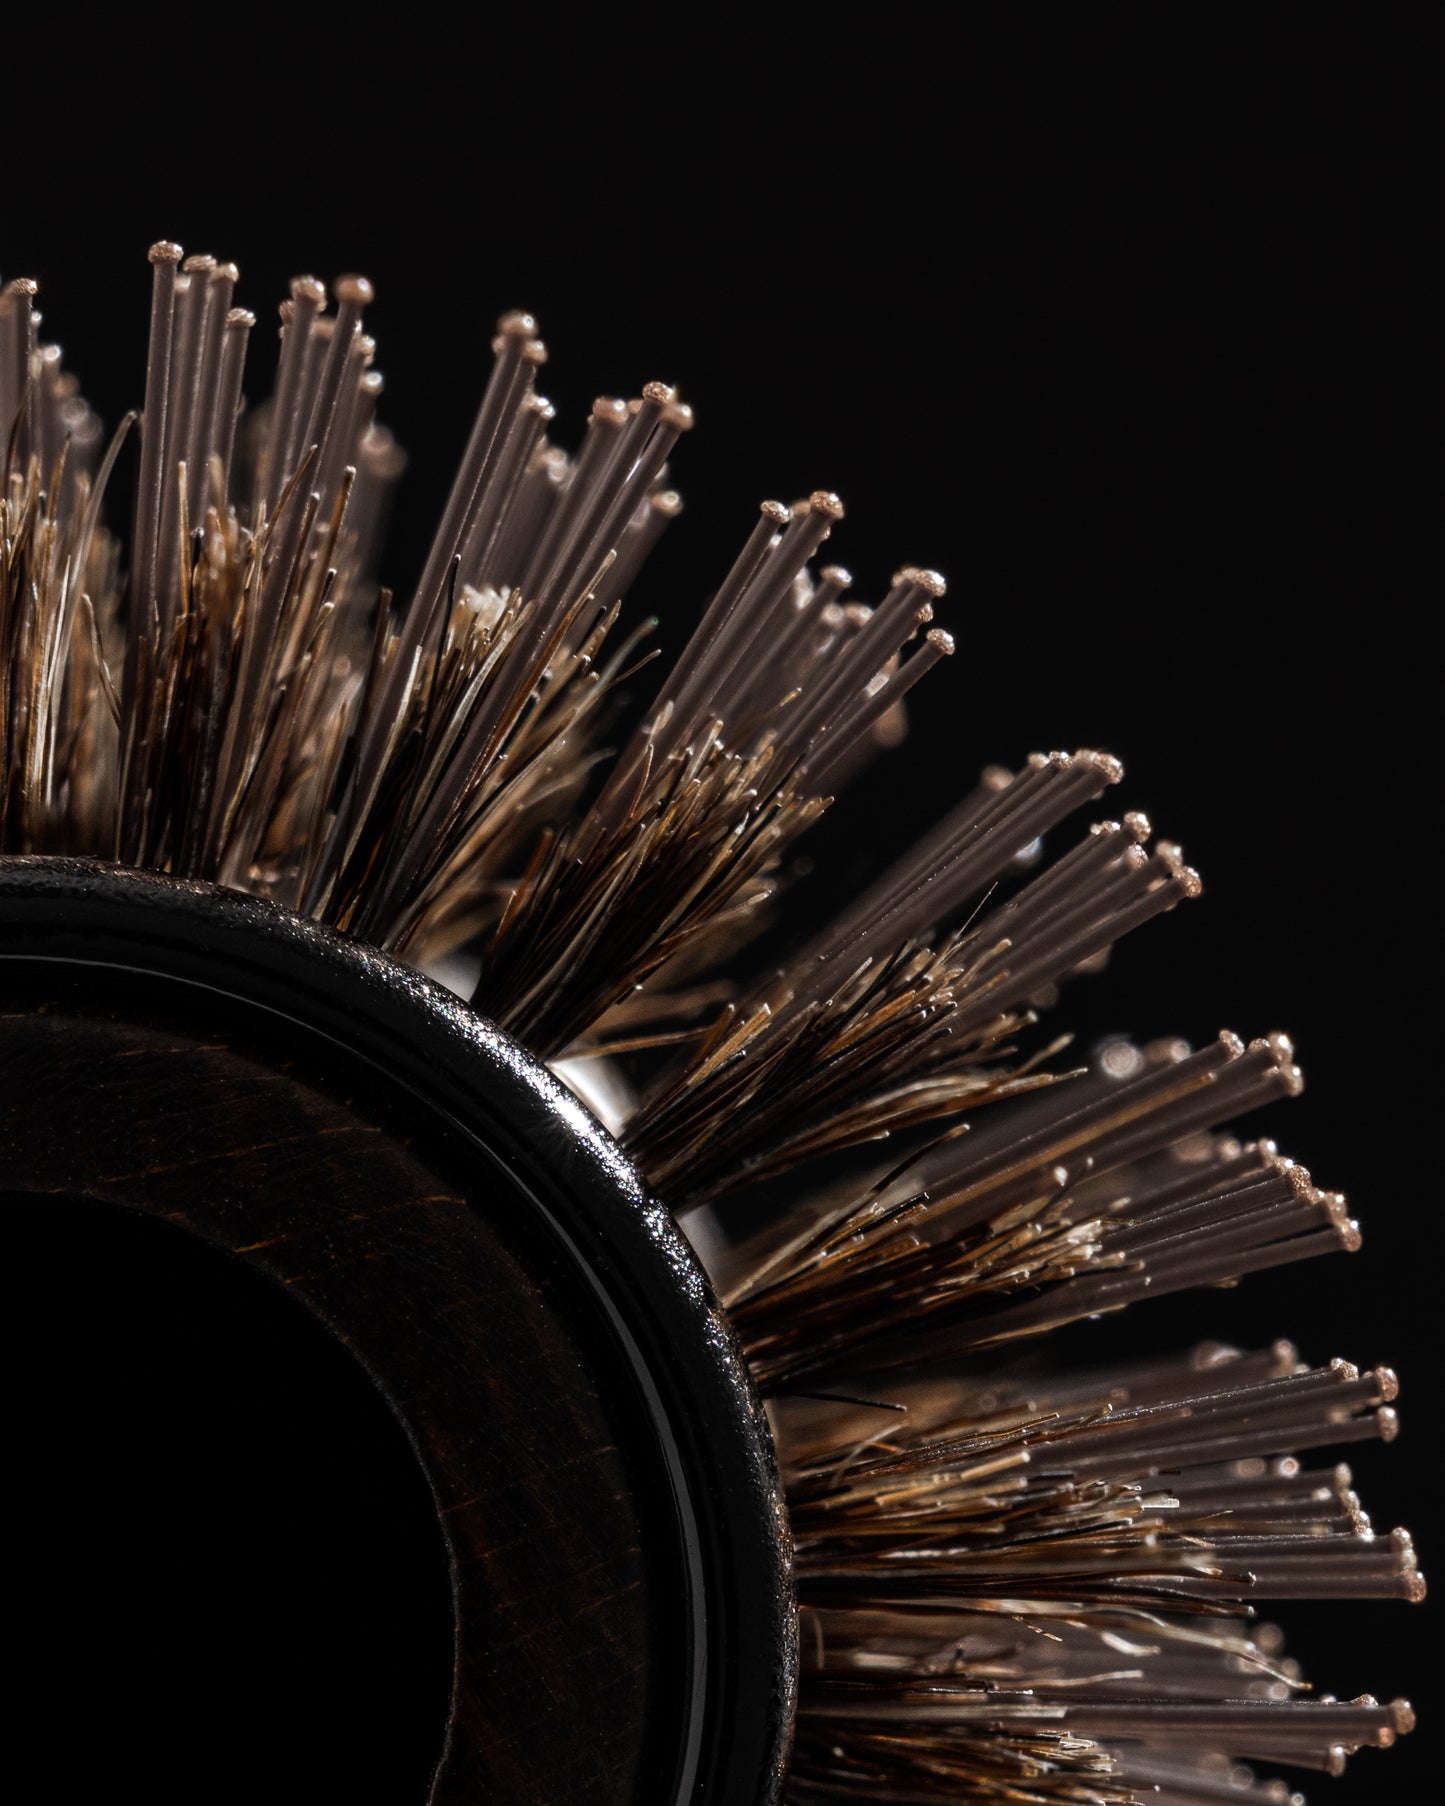 The boar bristle brush helps smooth the hair while locking in moisture and providing shine. Its unique design makes it more gentle on your hair, featuring heat-resistant nylon threads that work to distribute heat evenly from the core. 